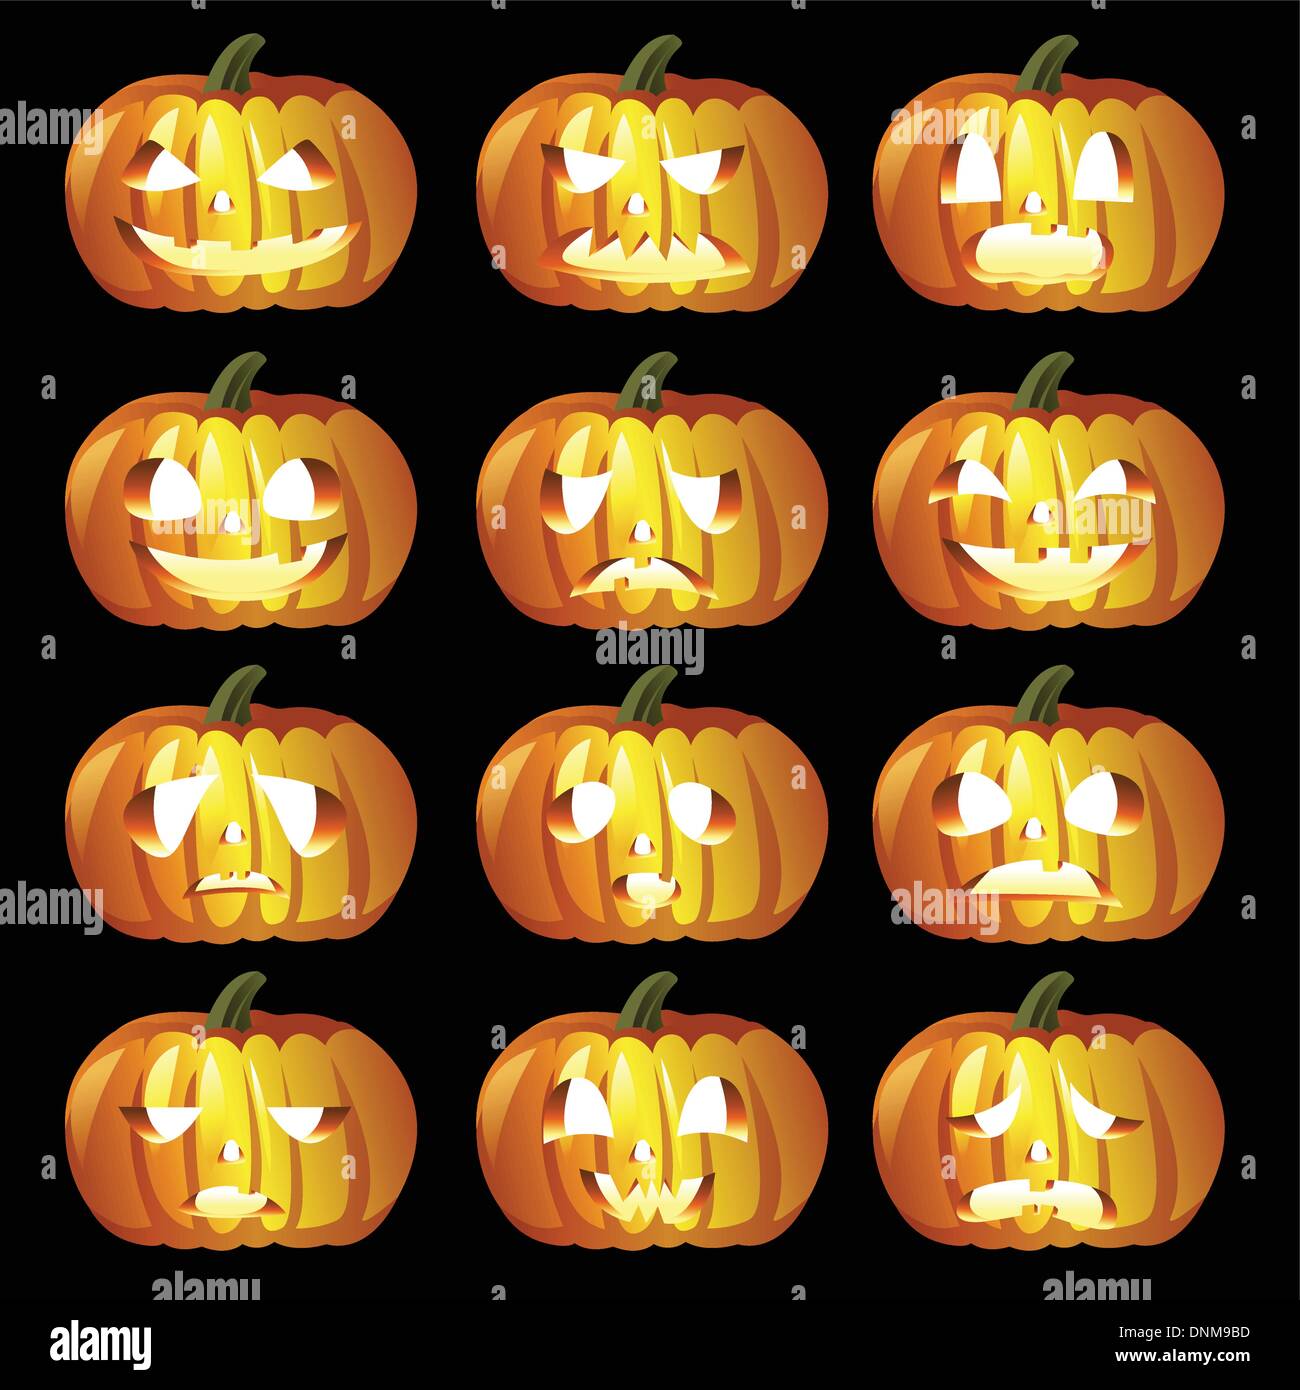 A vector illustration of different Halloween pumpkins expression Stock Vector